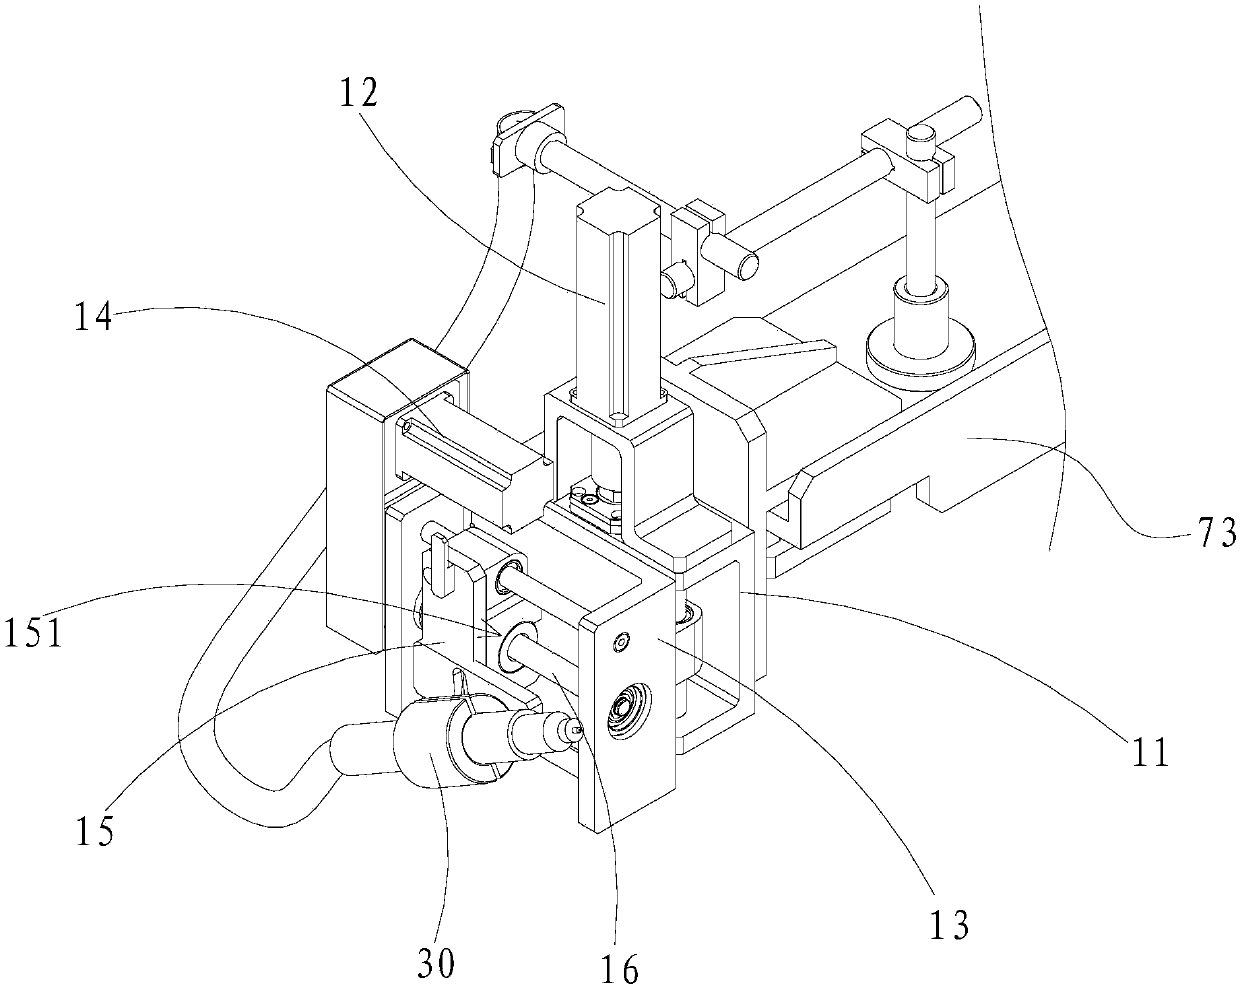 Welding device for compressor mufflers and mounting brackets